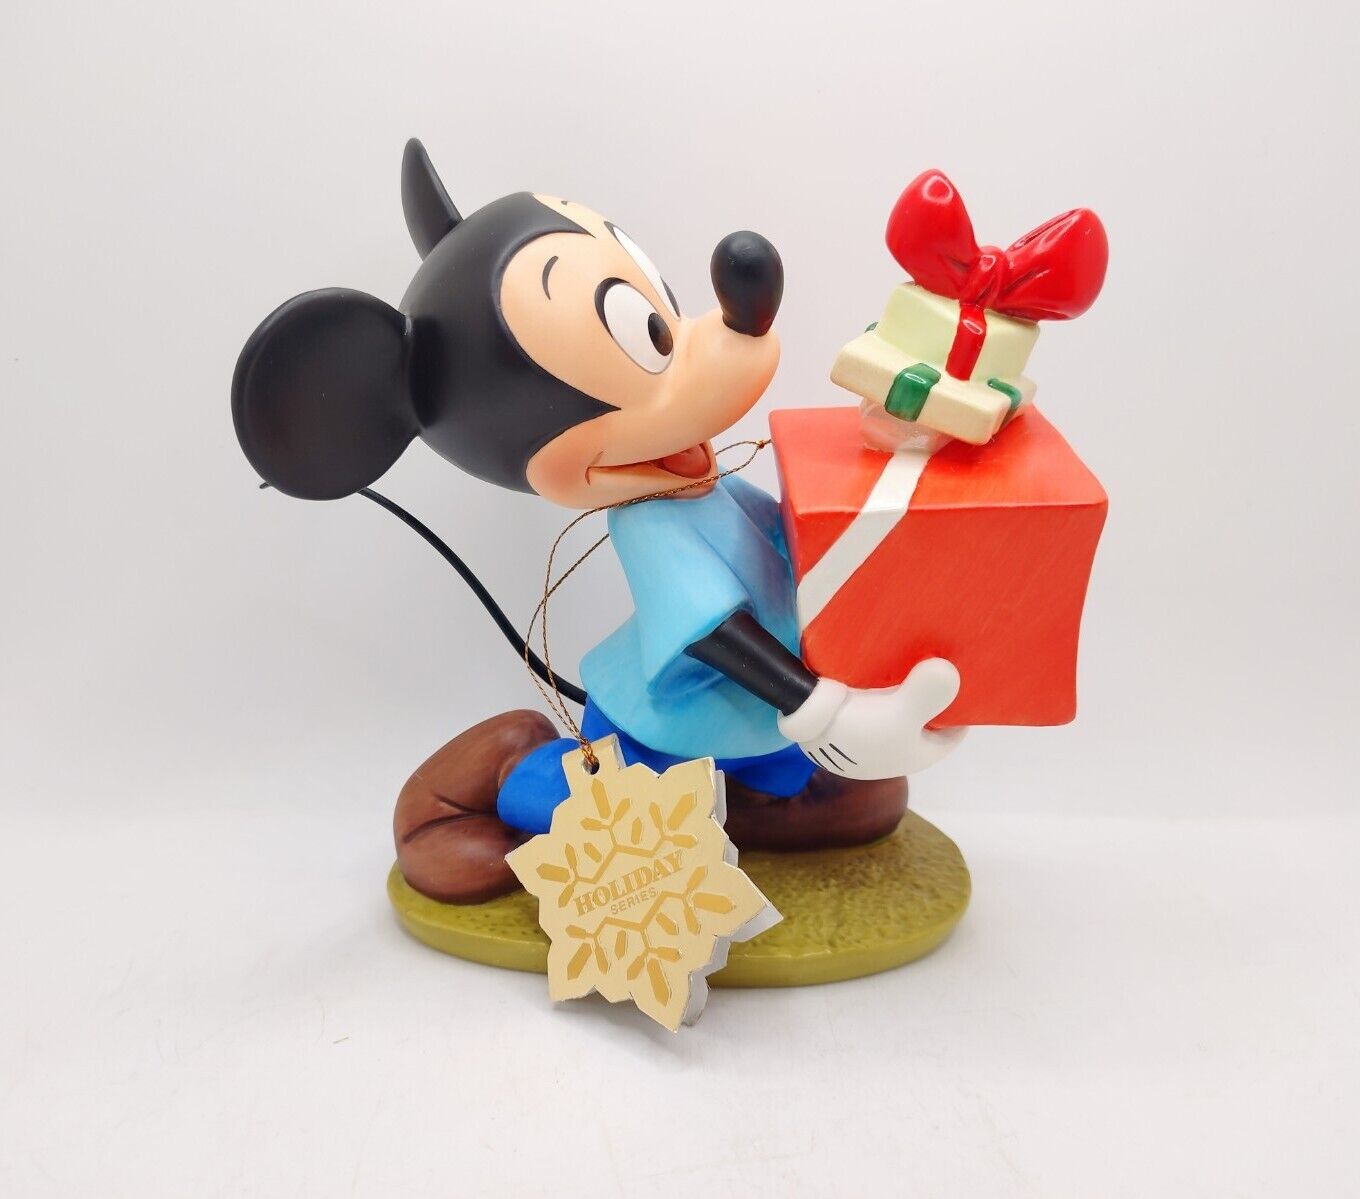 WDCC Mickey Mouse Large Figurine From Pluto's Christmas Tree 1995 Retired W/Box